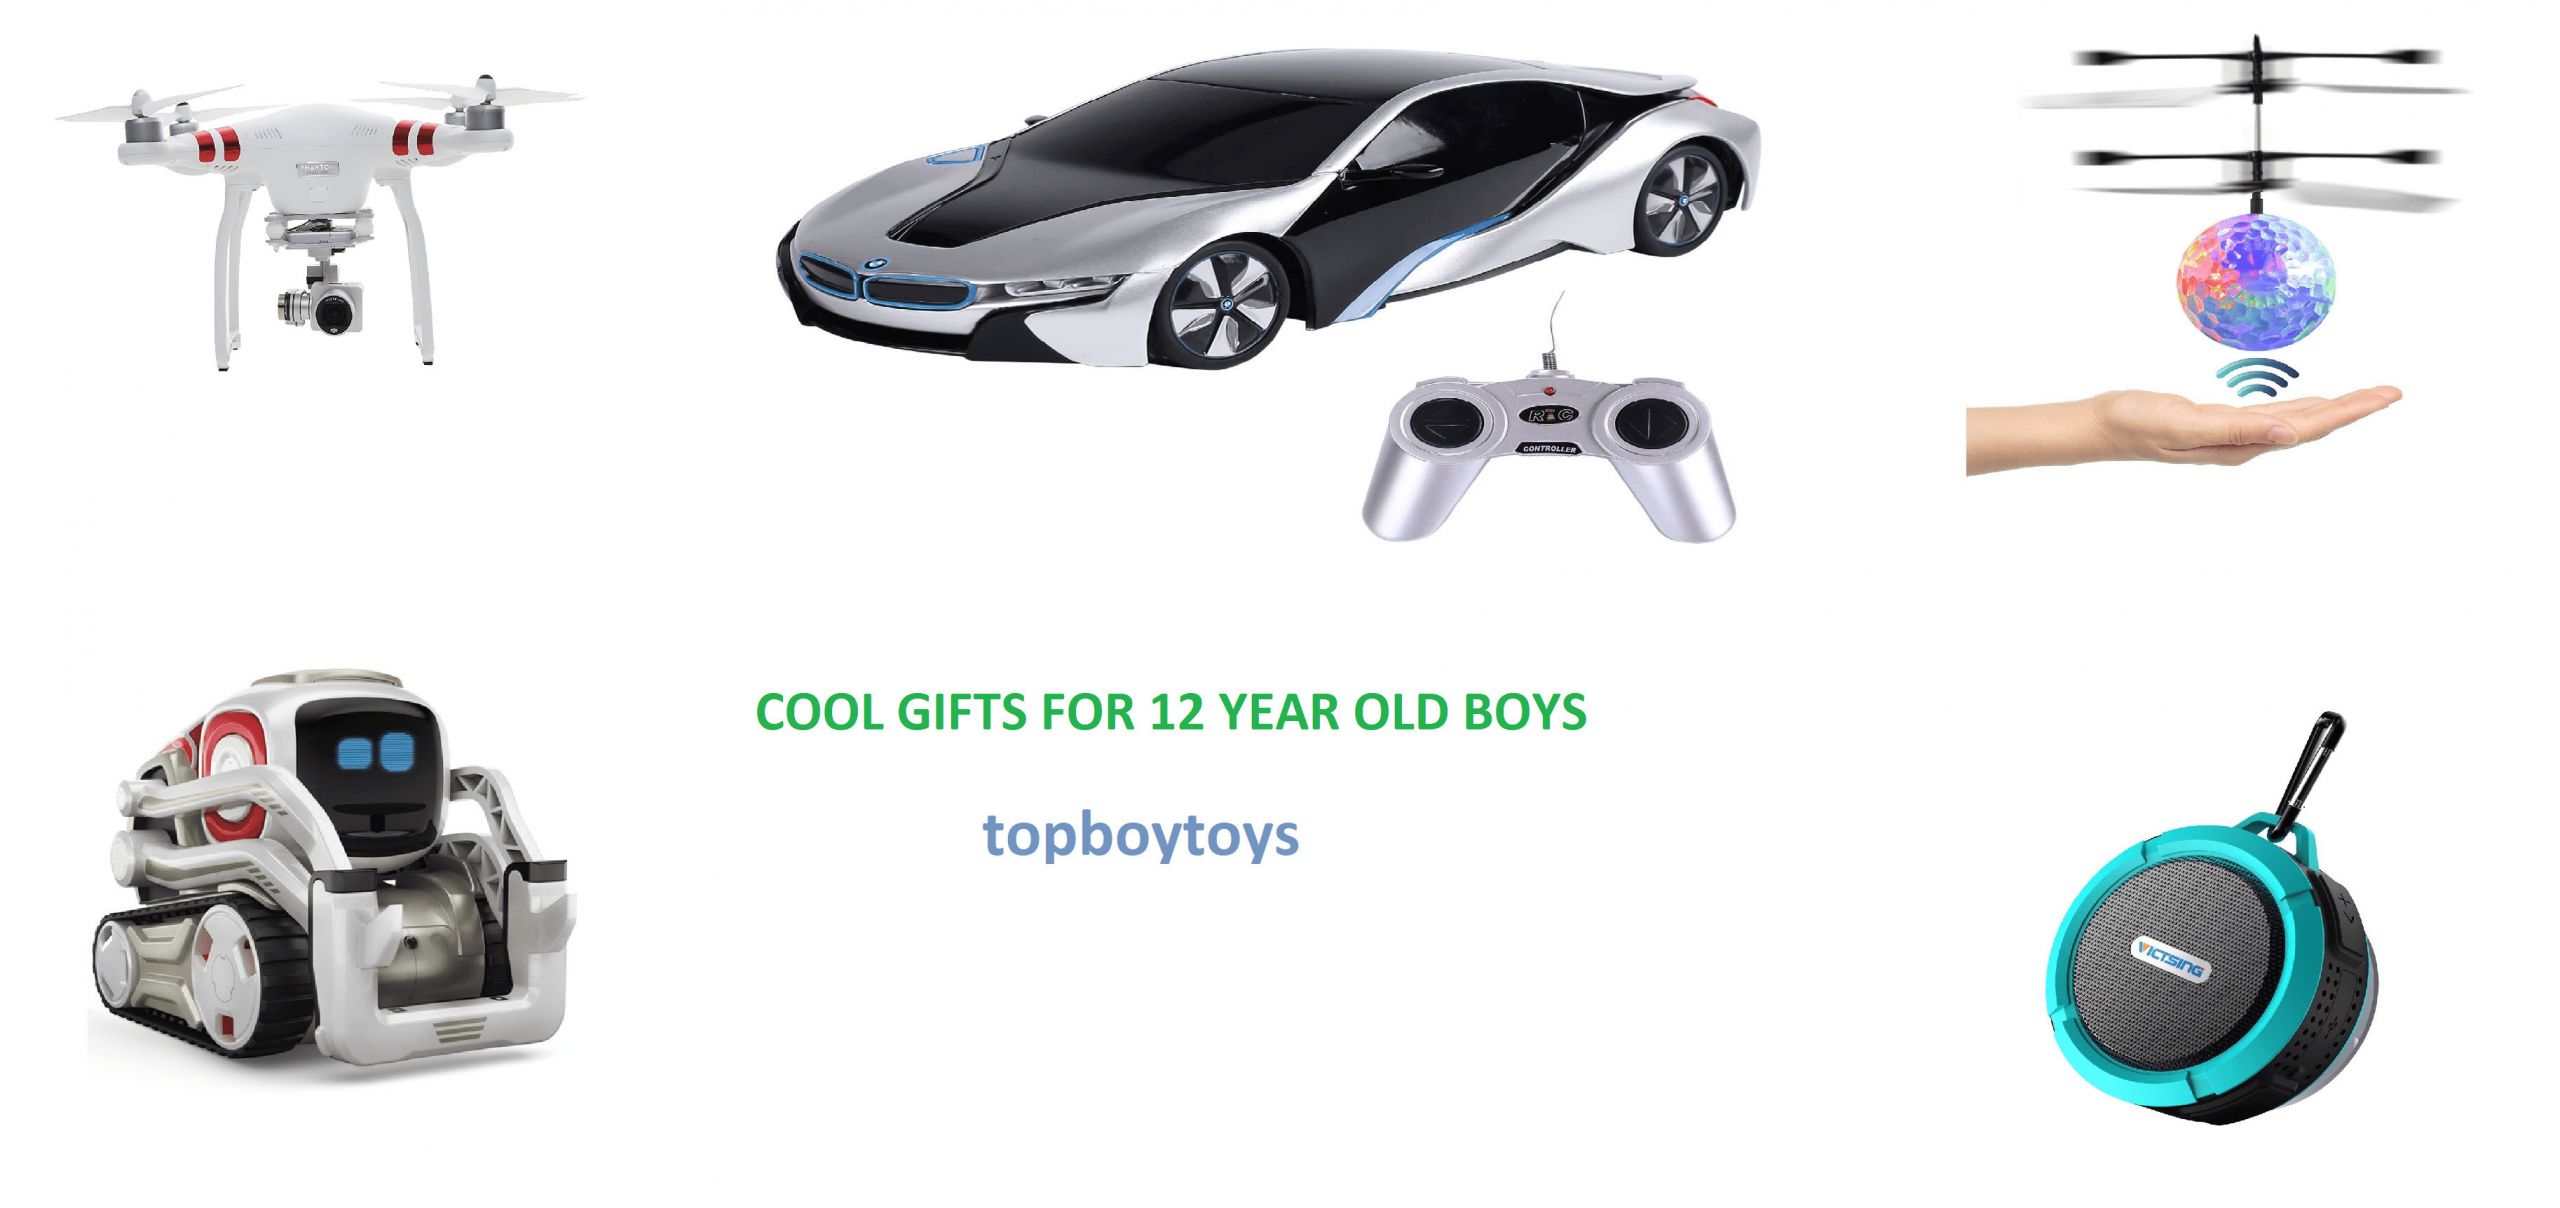 Gift Ideas For 12 Year Old Boys
 Small Gift Ideas for 12 Year Old Boy